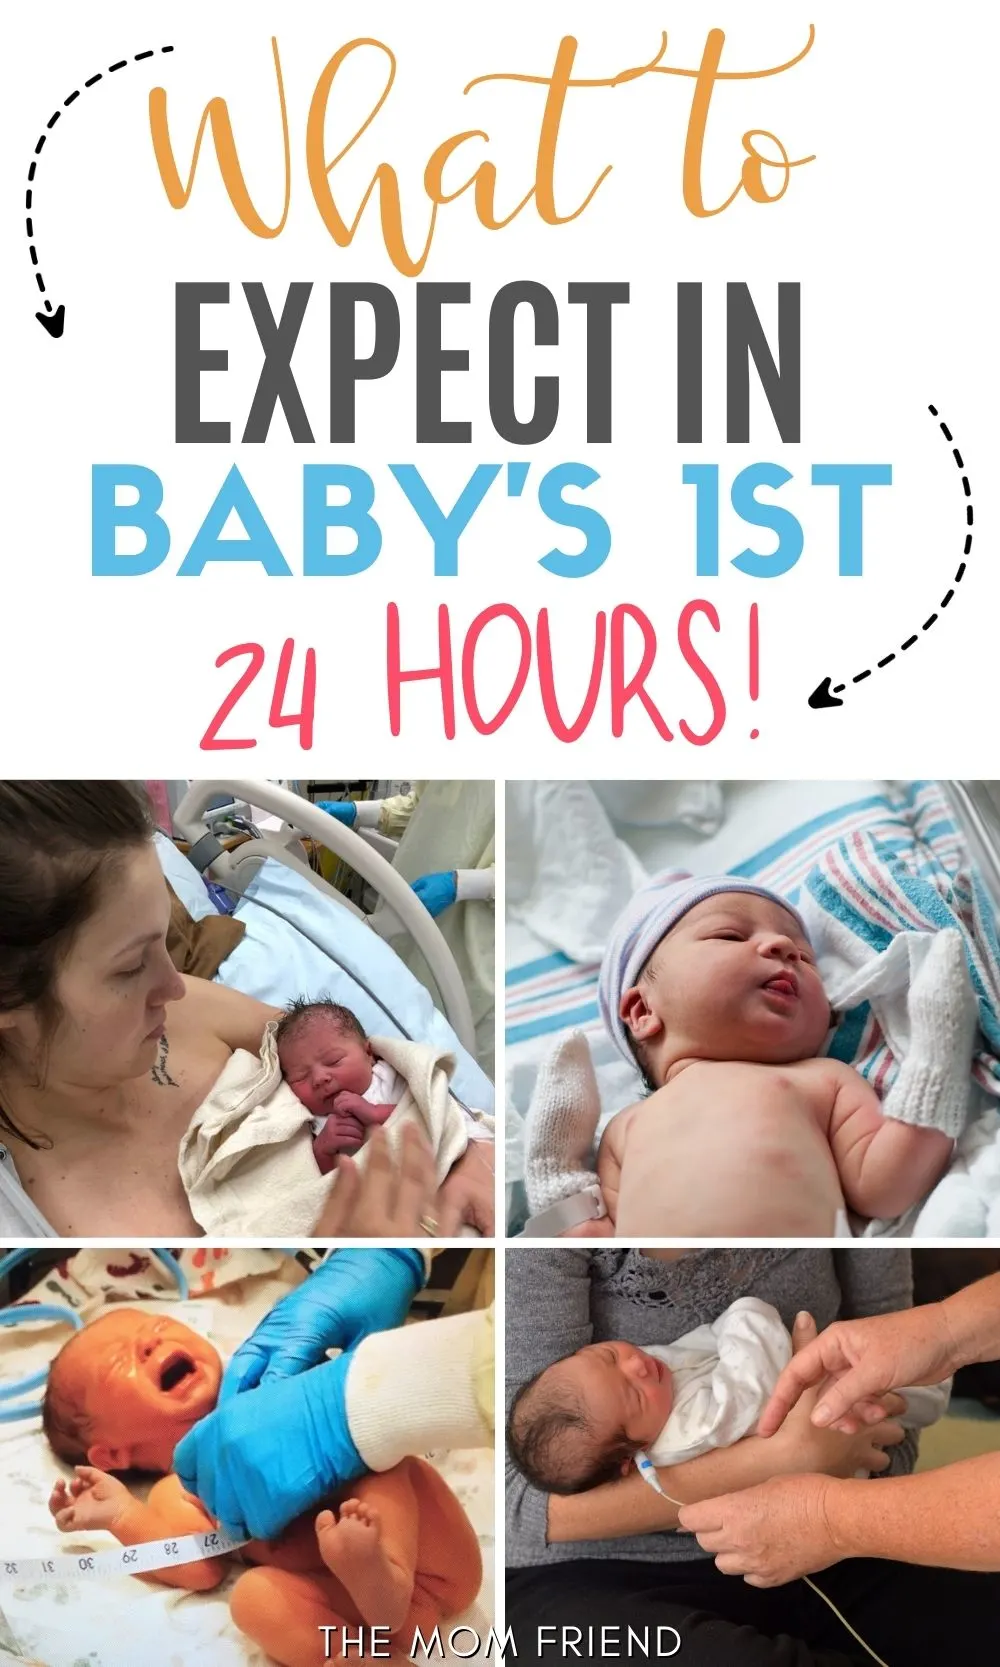 Pinterest graphic with text for "What to Expect in Baby's First 24 hours" and image collage.